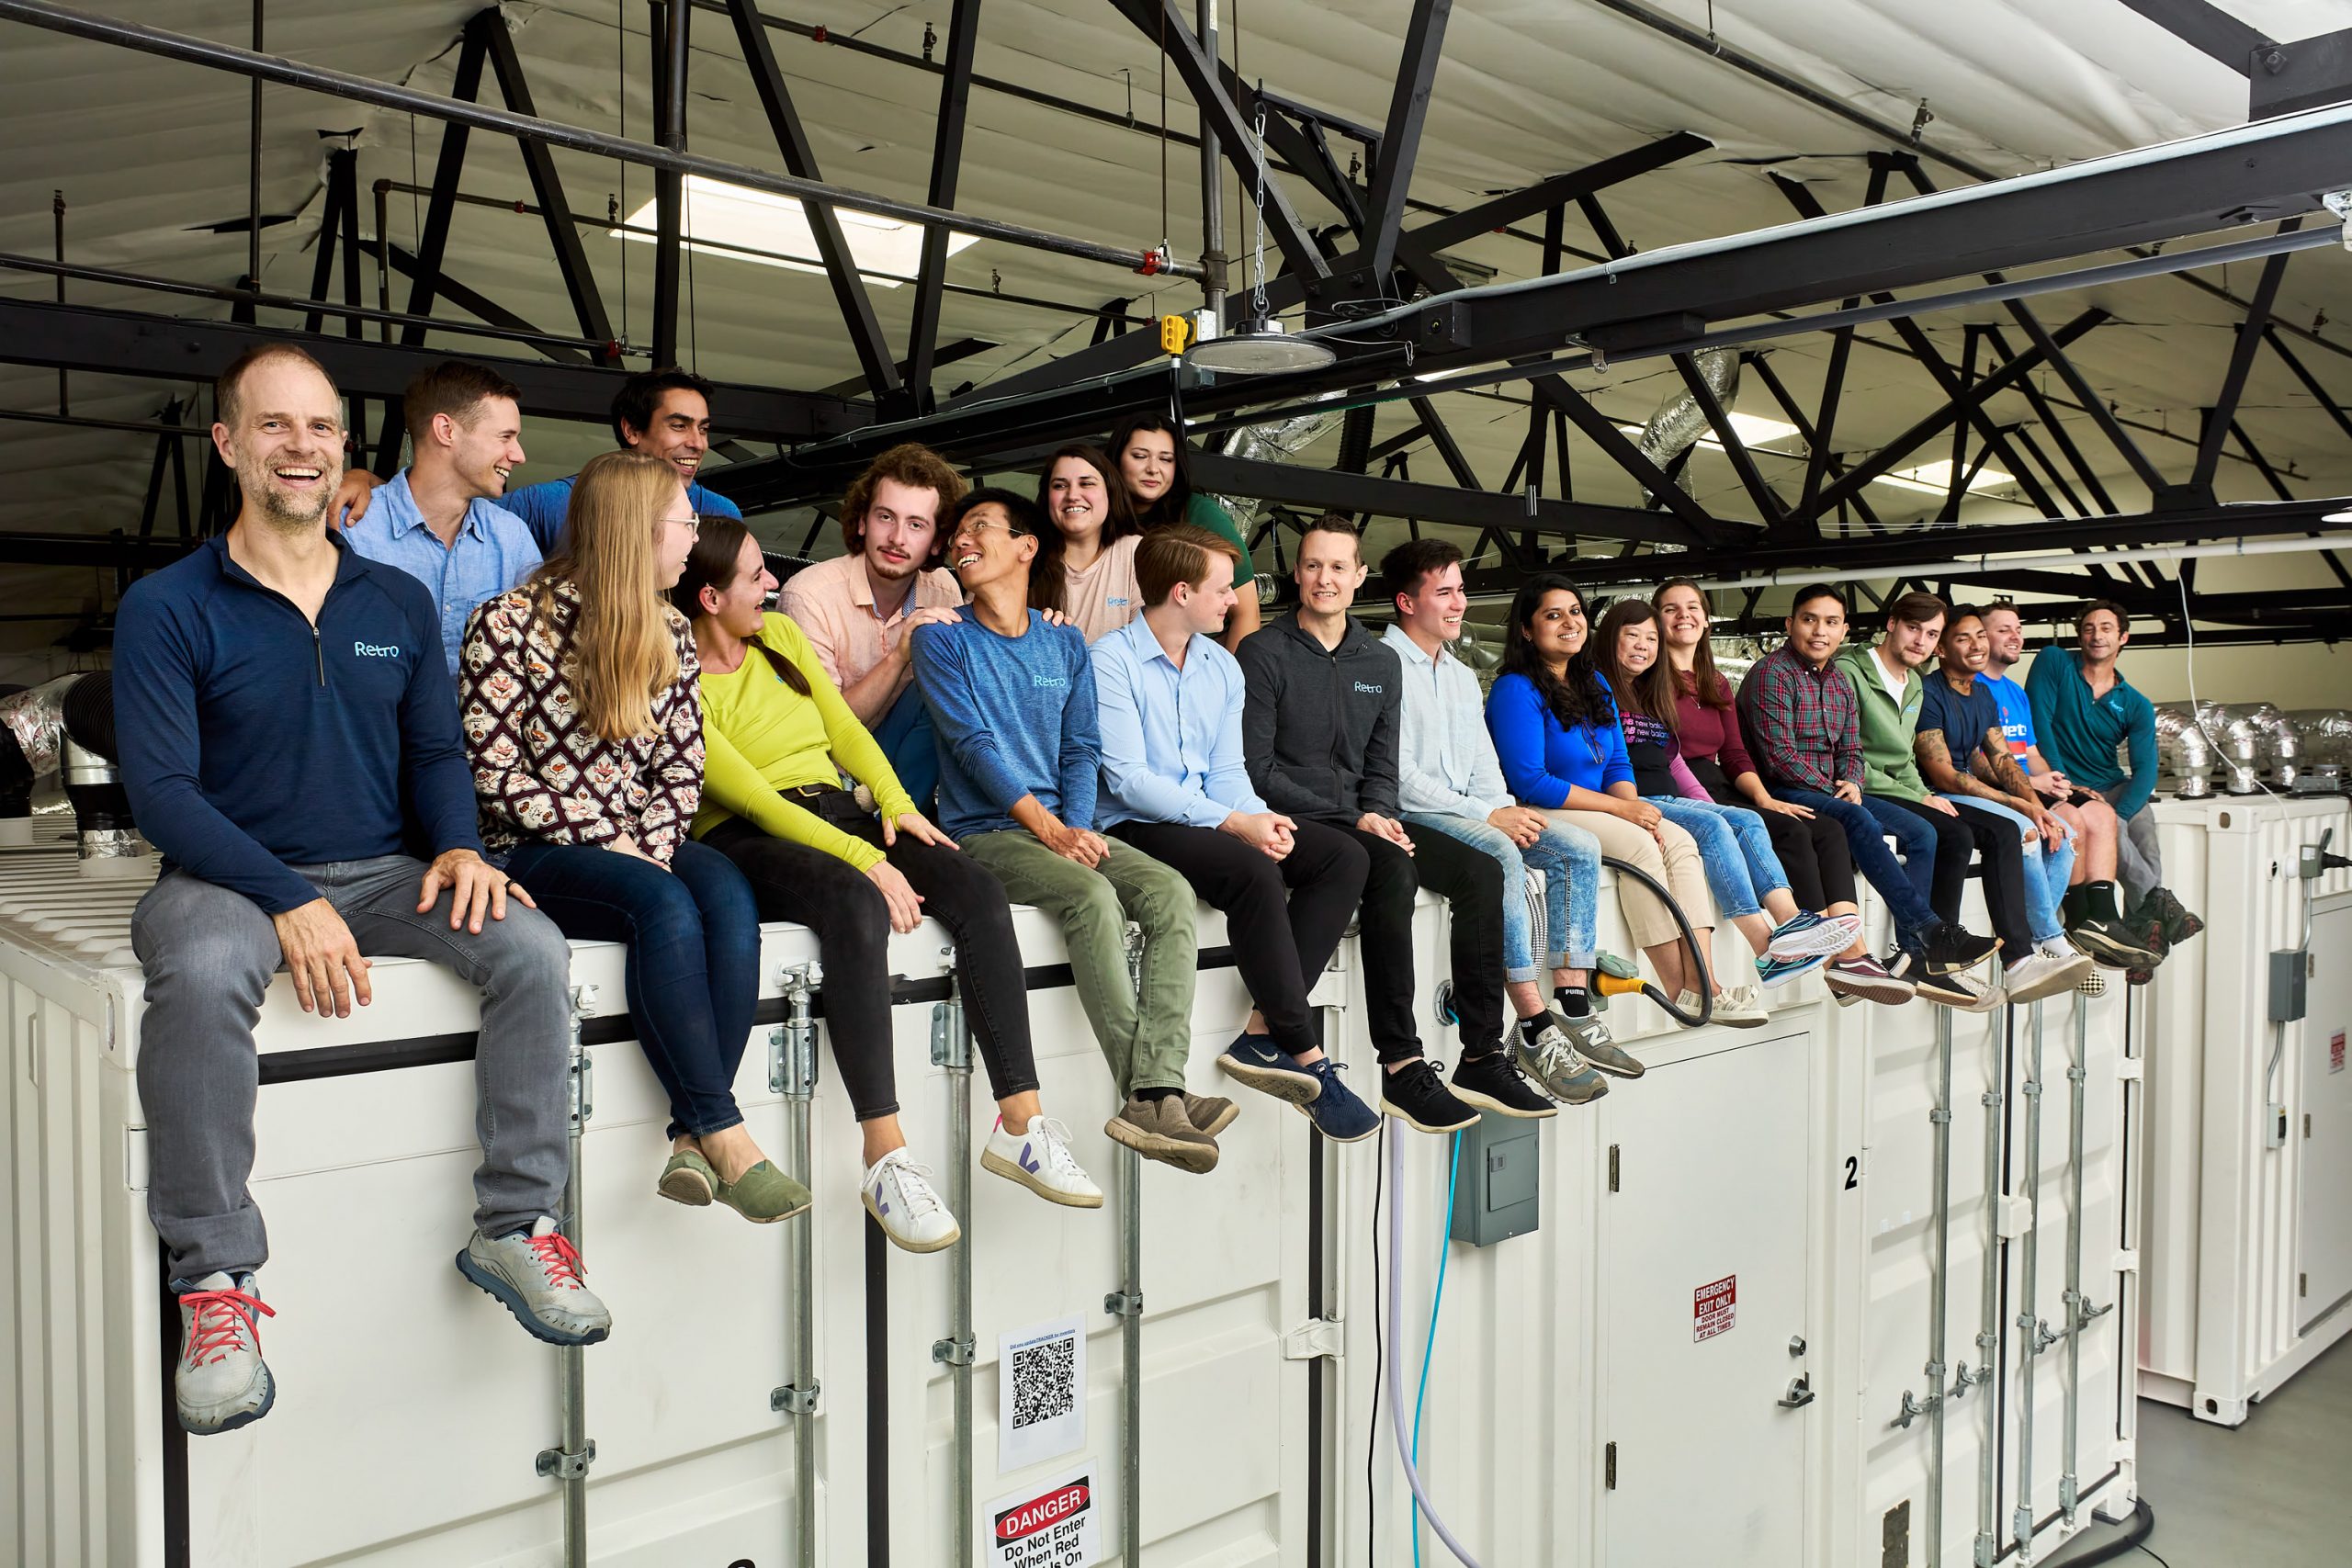 Retro Bio employees sitting on the top of the shipping containers that make up their lab space